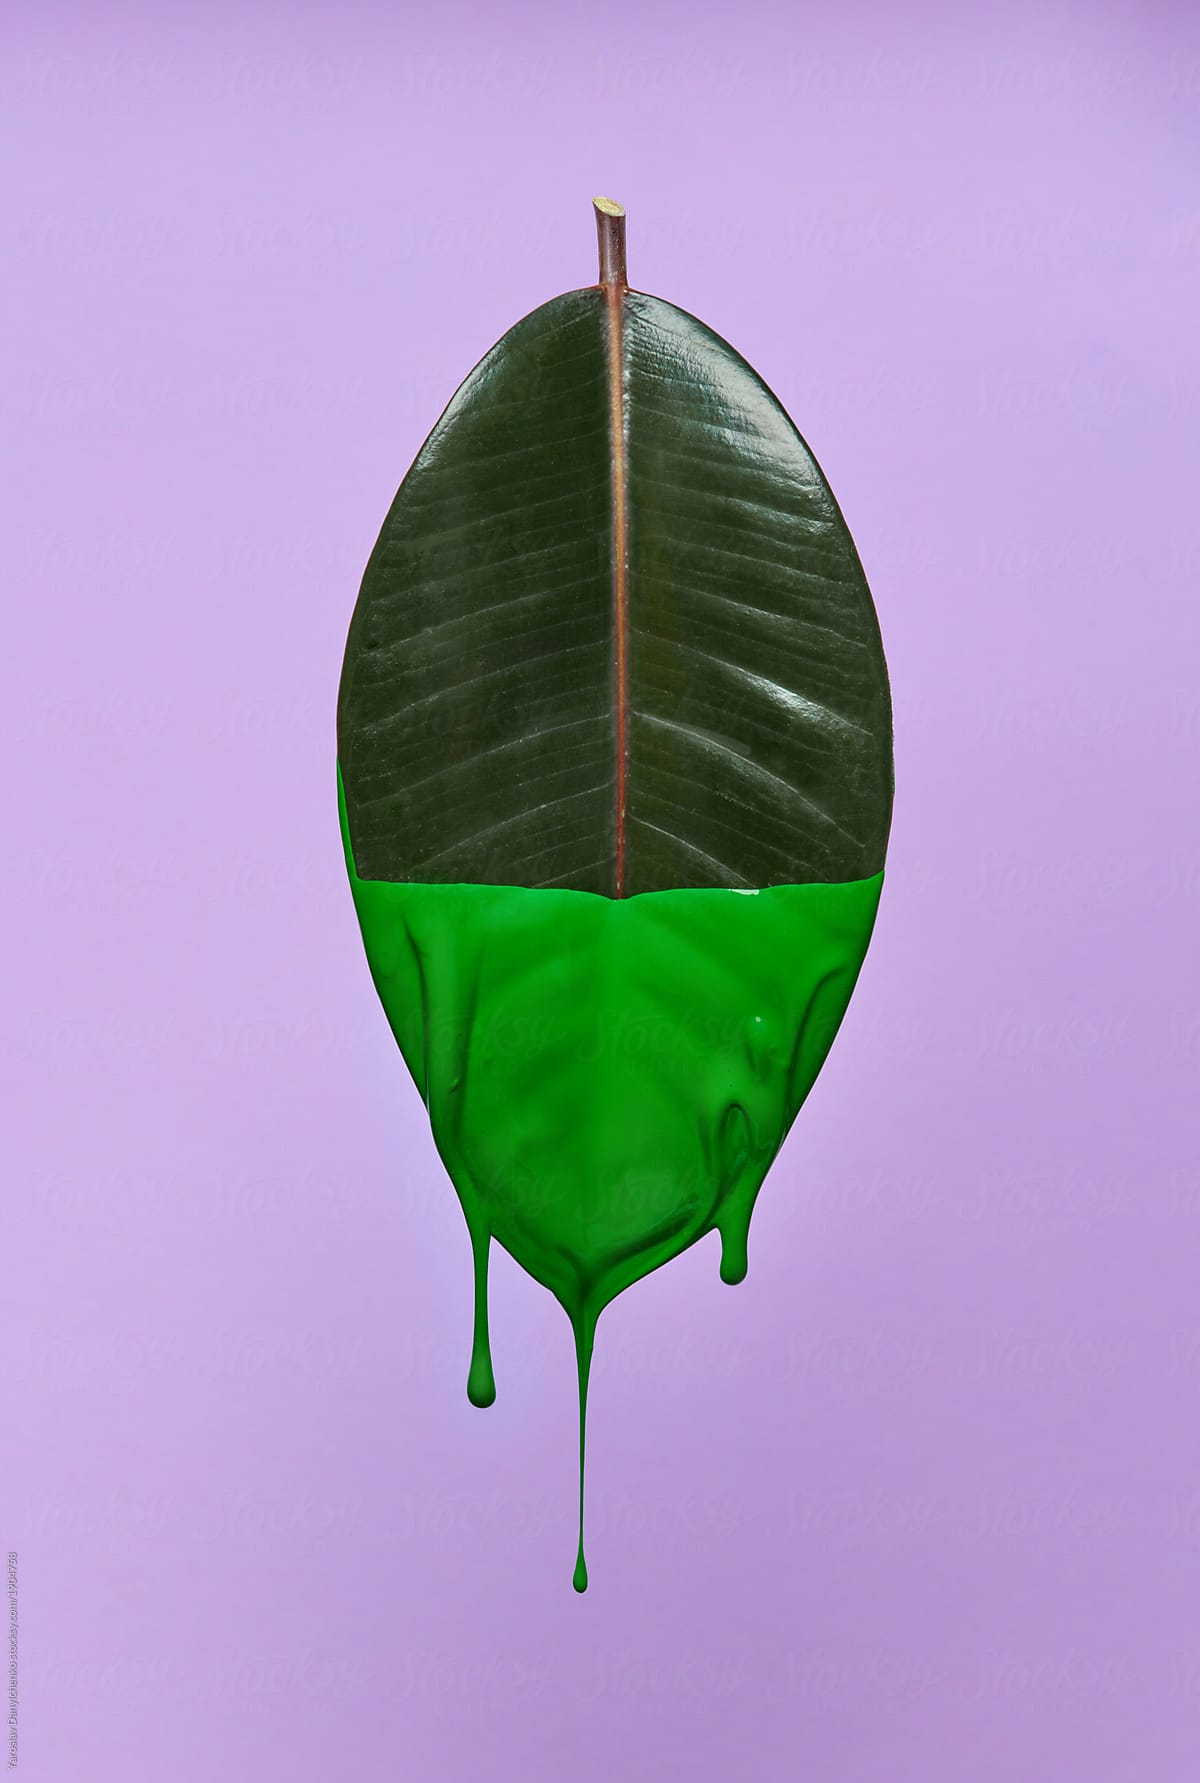 leaf of the ficus is painted with green paint